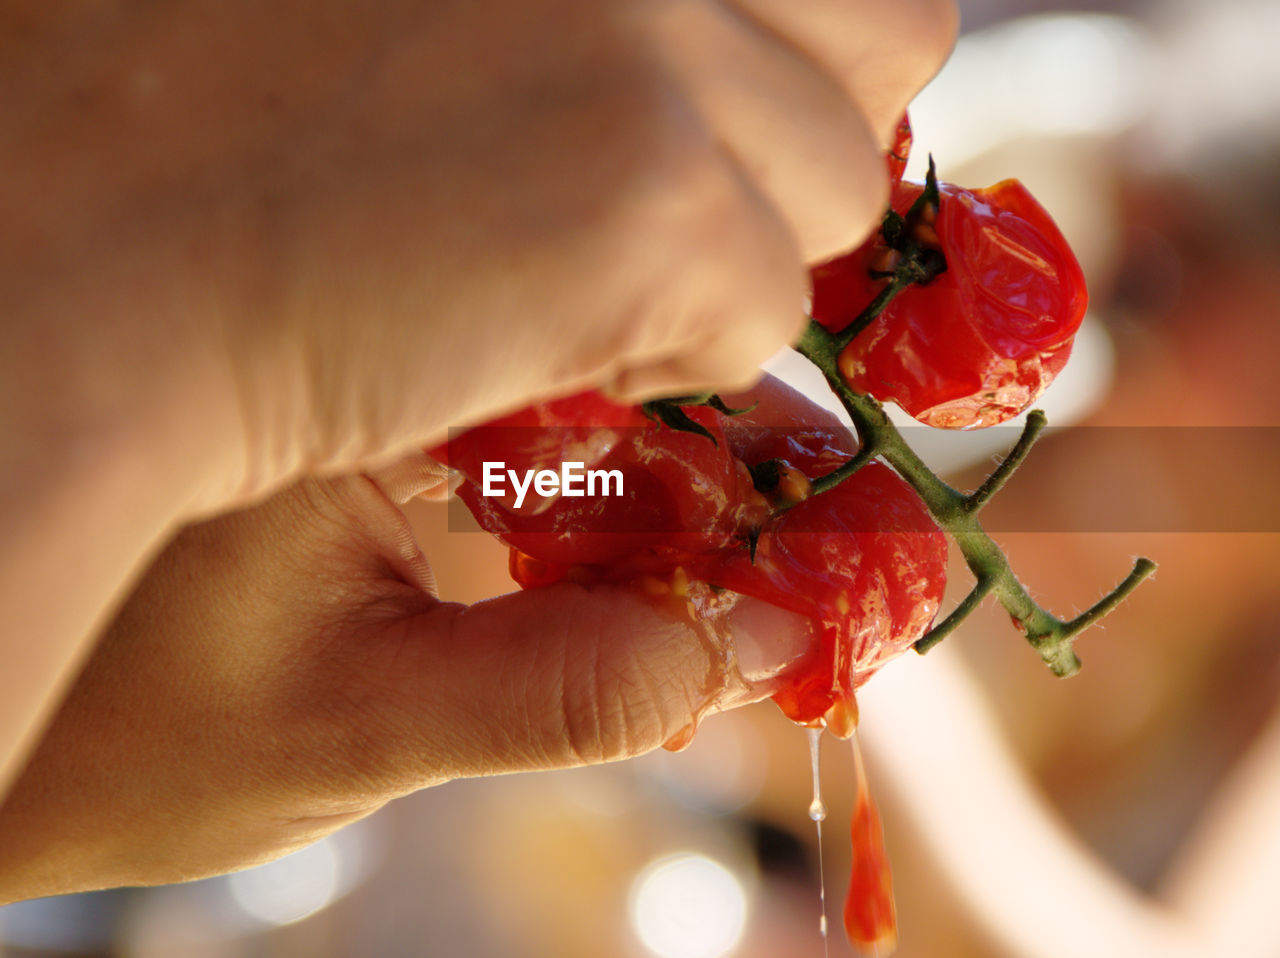 Cropped image of person squeezing juice from roasted cherry tomato